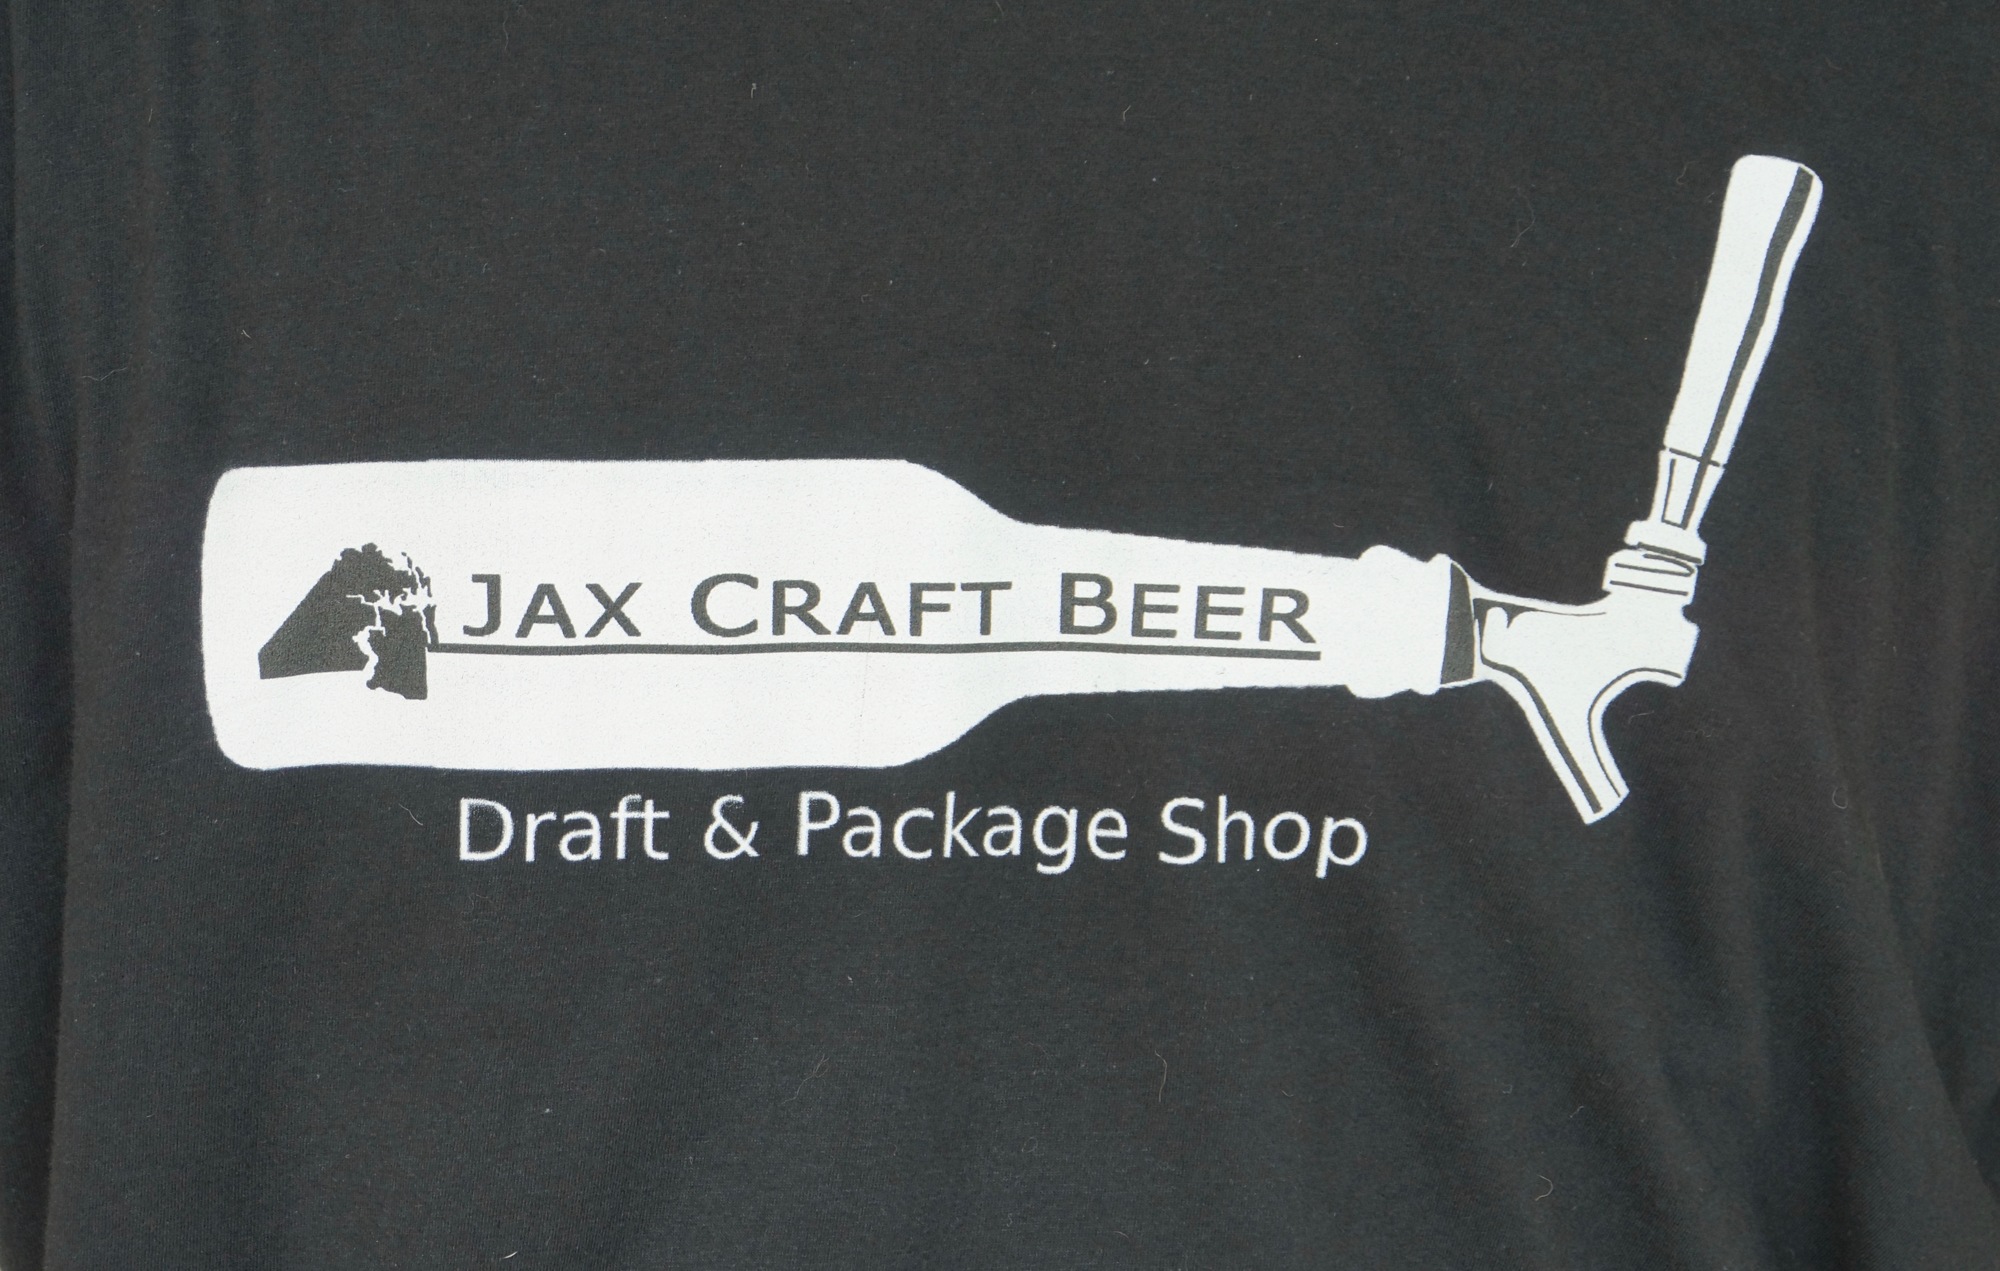 The logo for Jax Craft Beer, the bar planned for the Mandarin Outback Plaza.